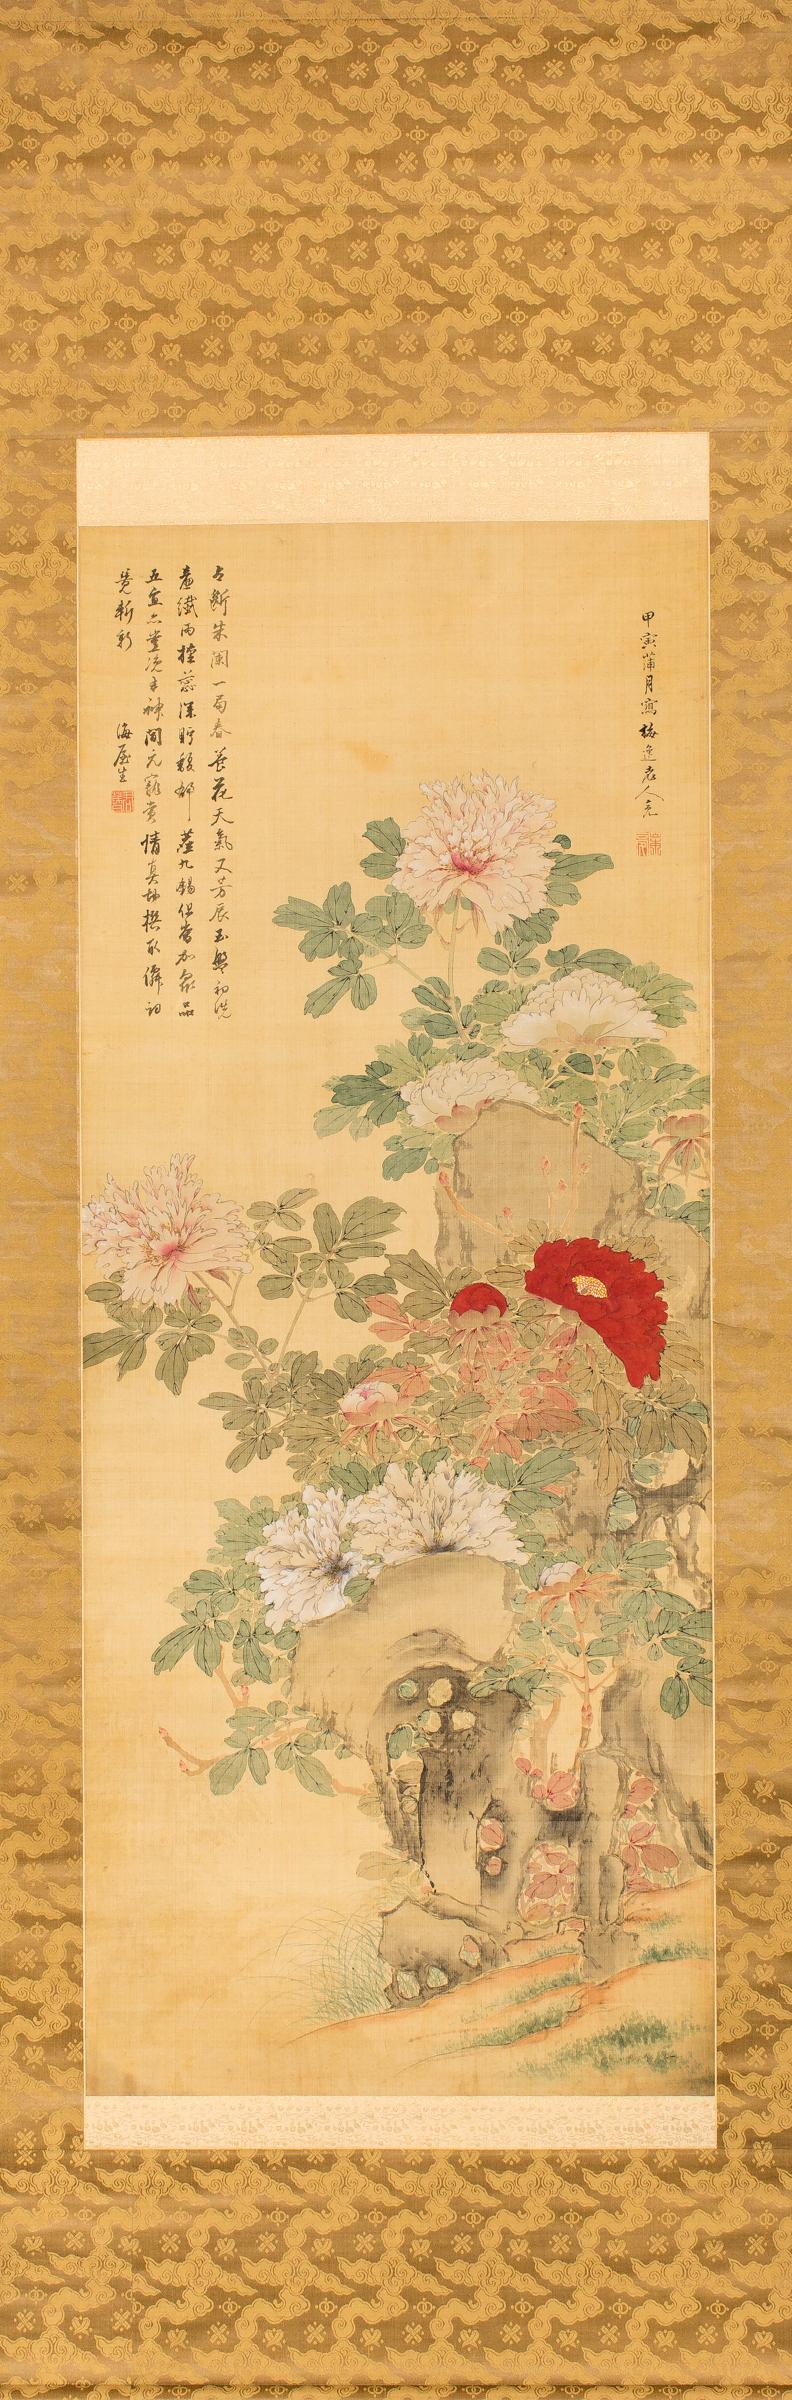 Edo period (first half of the 19th century) antique Japanese scroll of peonies. Signature and seal read: Baiitsu Yamamoto, (1783-1856). Yamamoto was the designated artist for a family located in the Nagoya area, was known for his paintings of